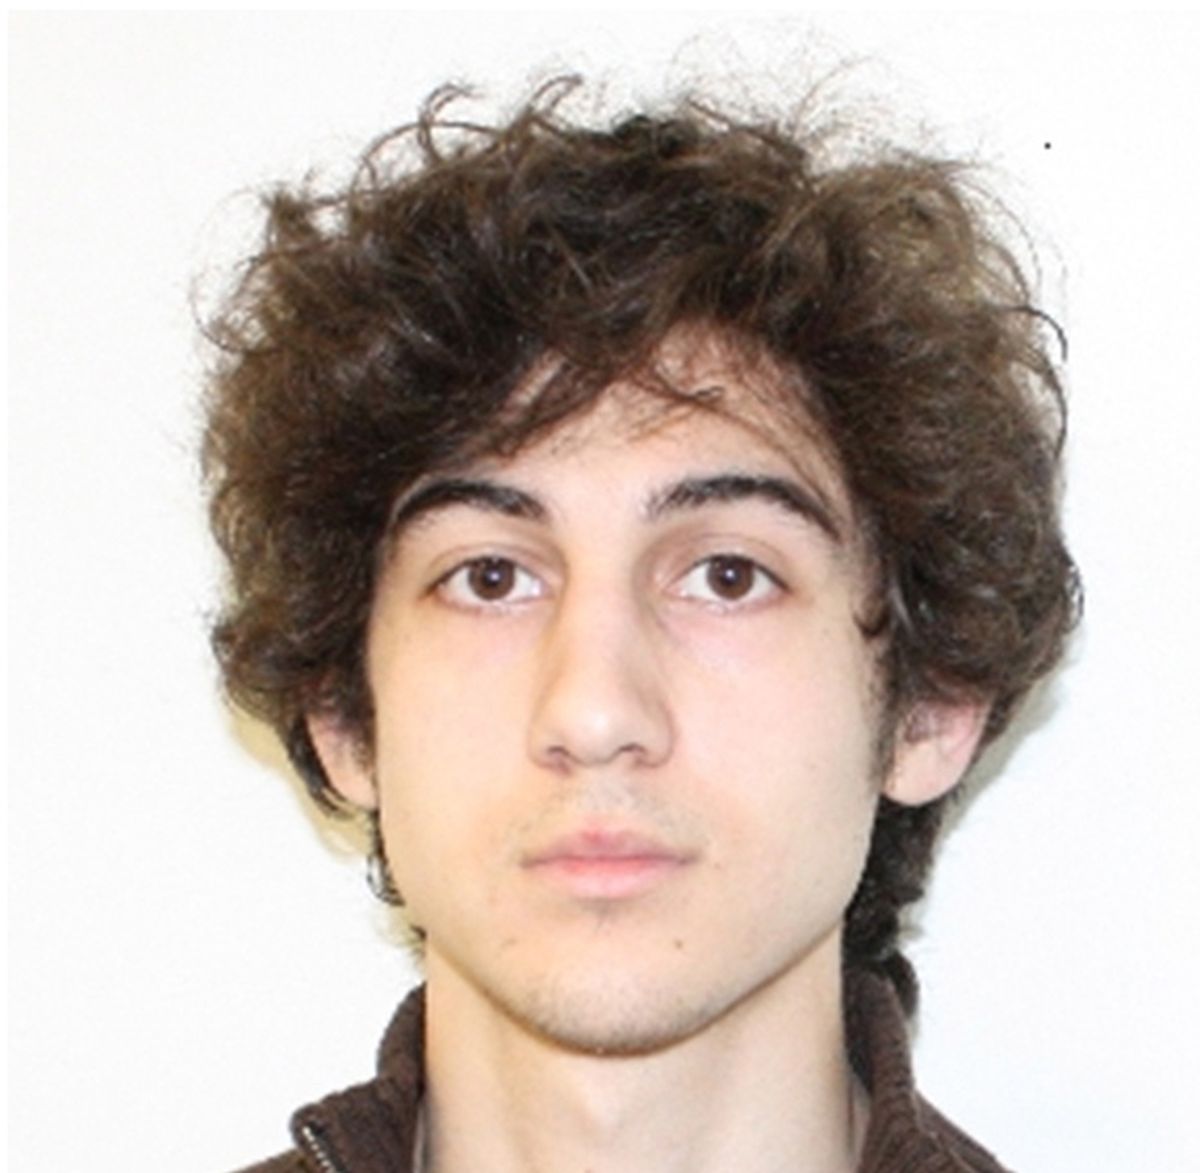 epa08577847 (FILE) A file picture of the handout image released on 19 April 2013 by the Federal Bureau of Investigation shows Dzhokhar Tsarnaev, the Boston Marathon Bombing suspect, Boston, Massachusetts, USA (reissued on 31 July 2020). According to reports on 31 July 2020, a federal appeals court has overturned Boston Marathon bomber Dzhokhar Tsarnaev's death penalty sentence and a new trial will take place to determine a new sentence. Tsarnaev, 20, was sentenced to the death penalty on 15 May 2015 on multiple charges for carrying out the bombings along with his brother on 15 April 2013, at the finish line of the Boston Marathon, killing three people and wounding more than 250.  EPA/FBI / HANDOUT  HANDOUT EDITORIAL USE ONLY/NO SALES *** Local Caption *** 51935625